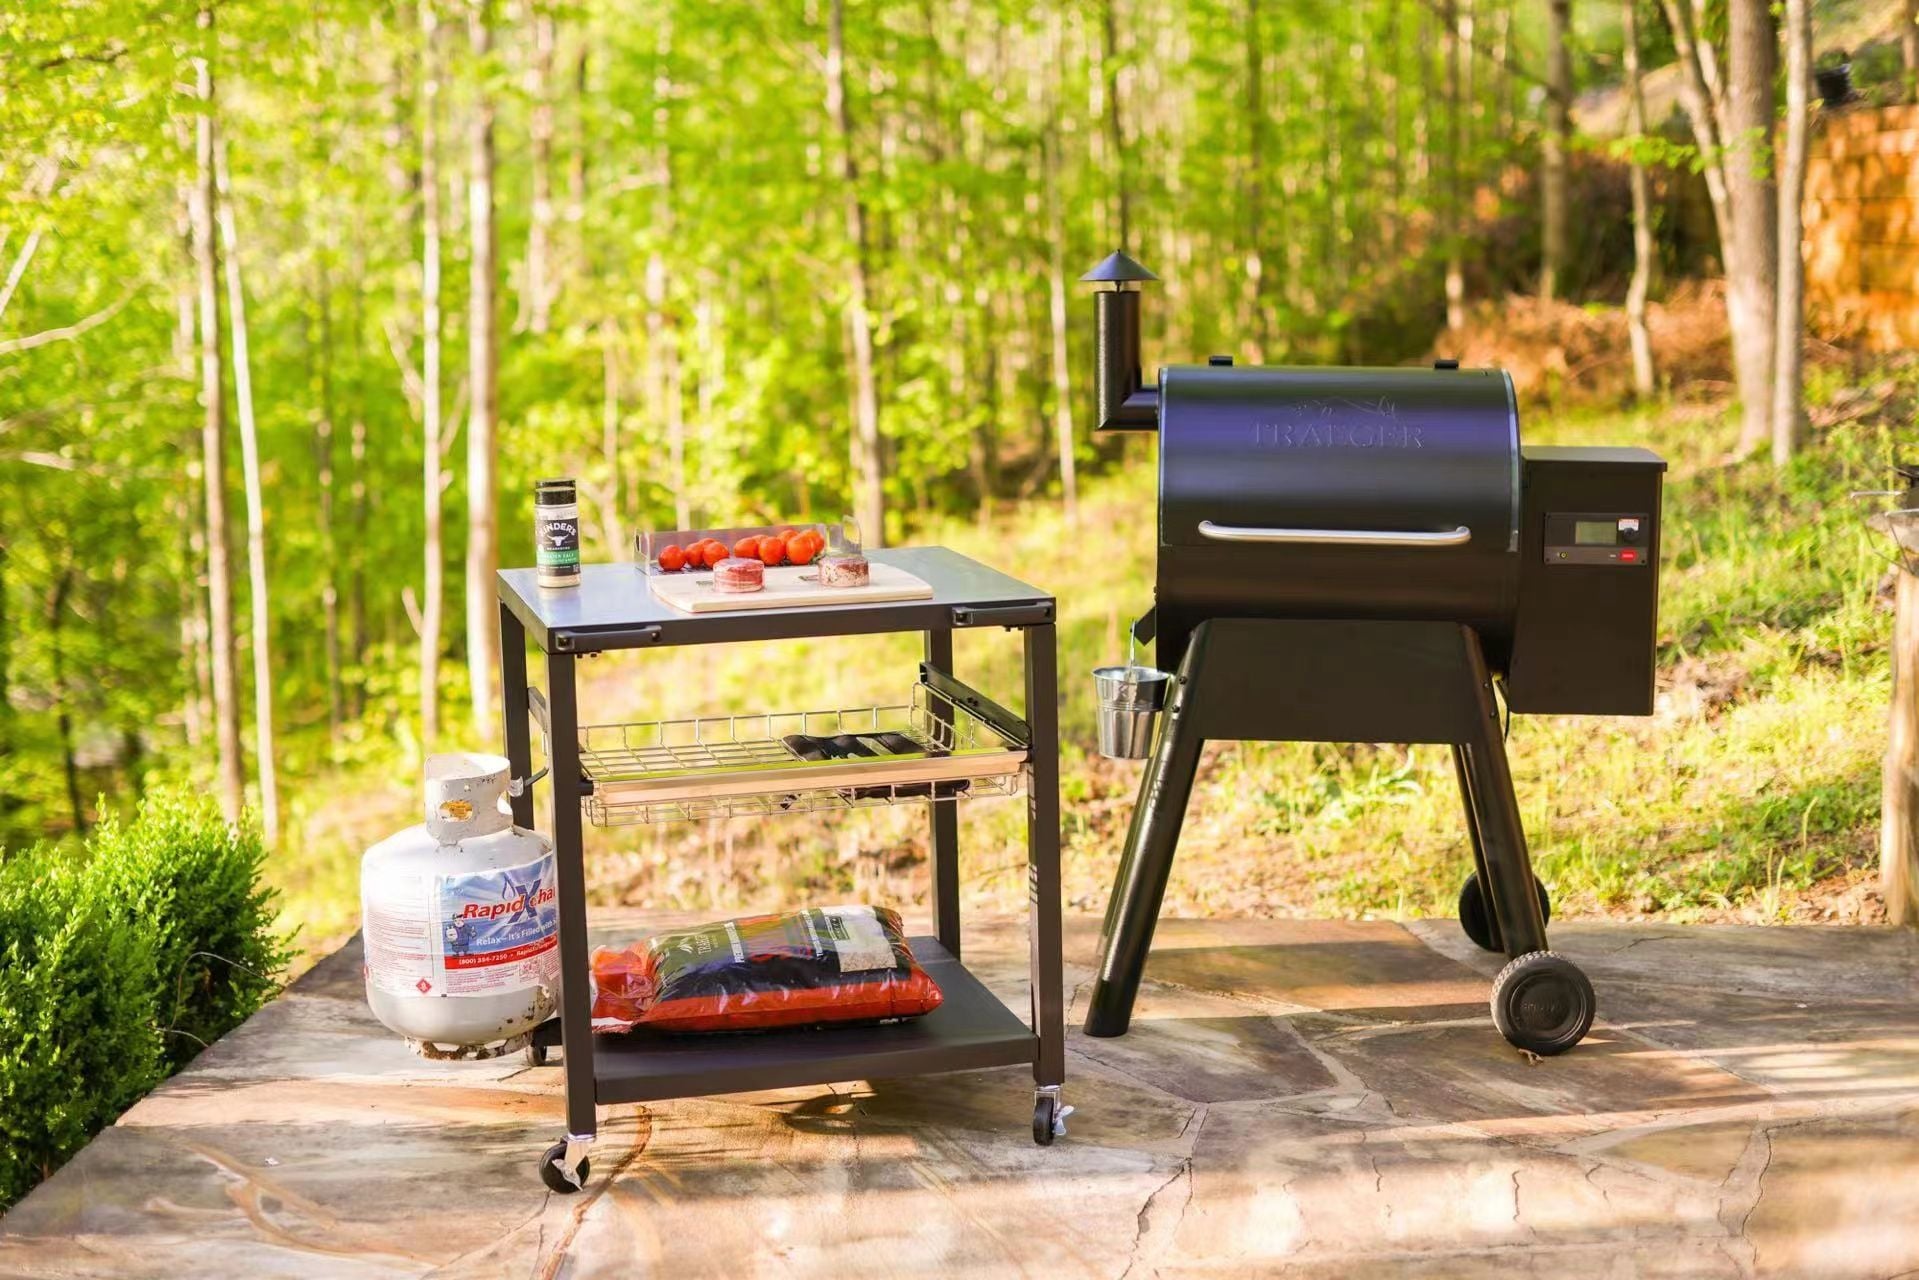 NUUK USA NUUK Grill Grilling Tables the department & Grill in Steel at Stands Carts Cart Grill